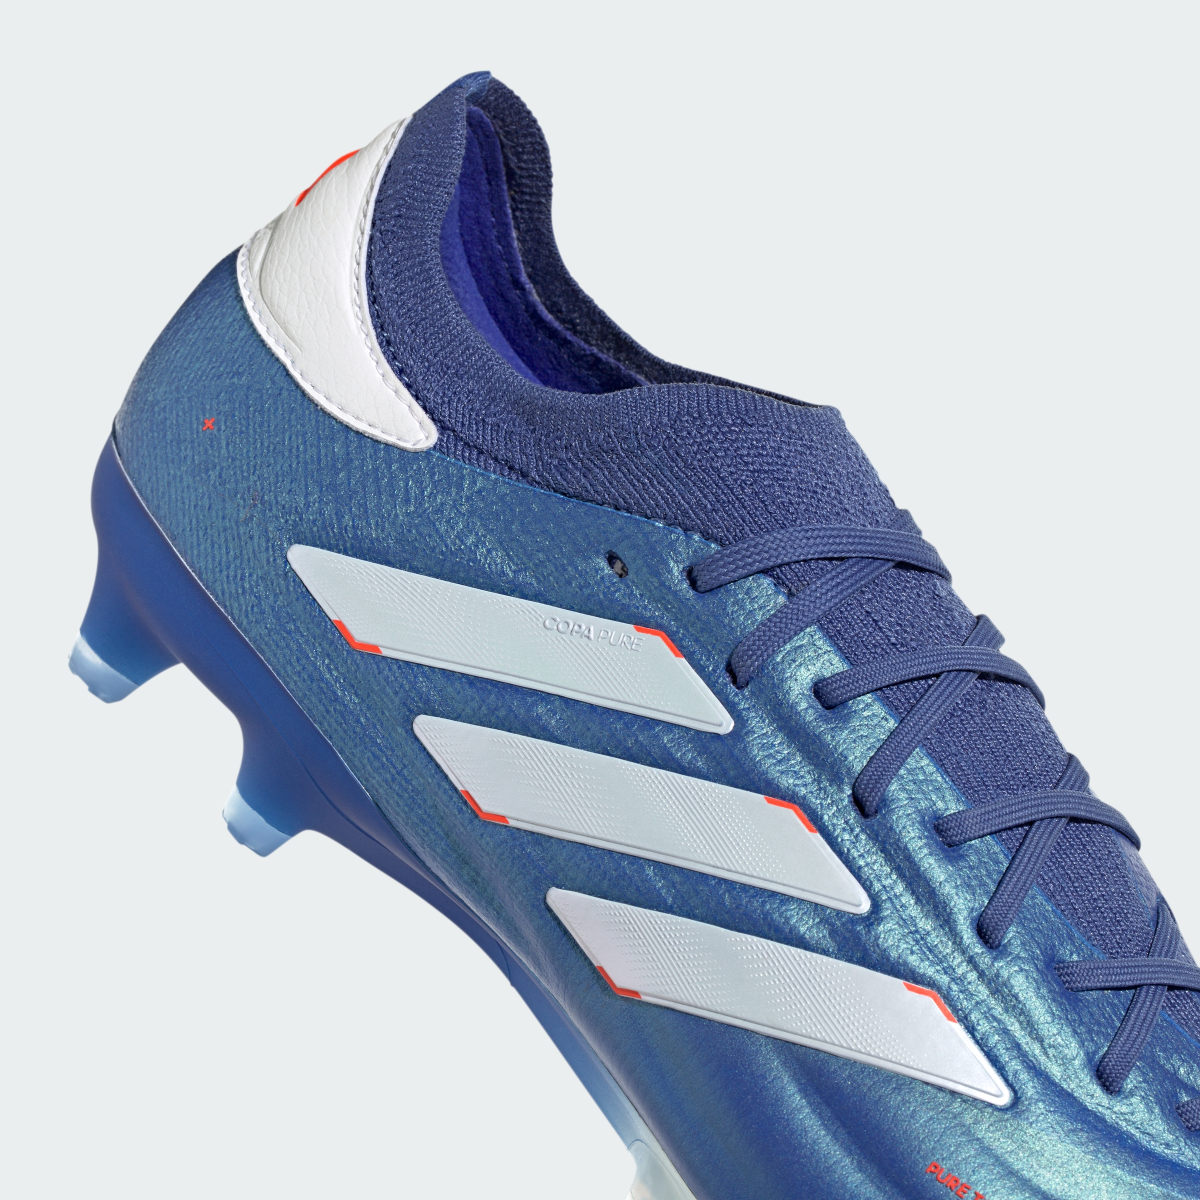 Adidas Copa Pure II+ Firm Ground Boots. 4